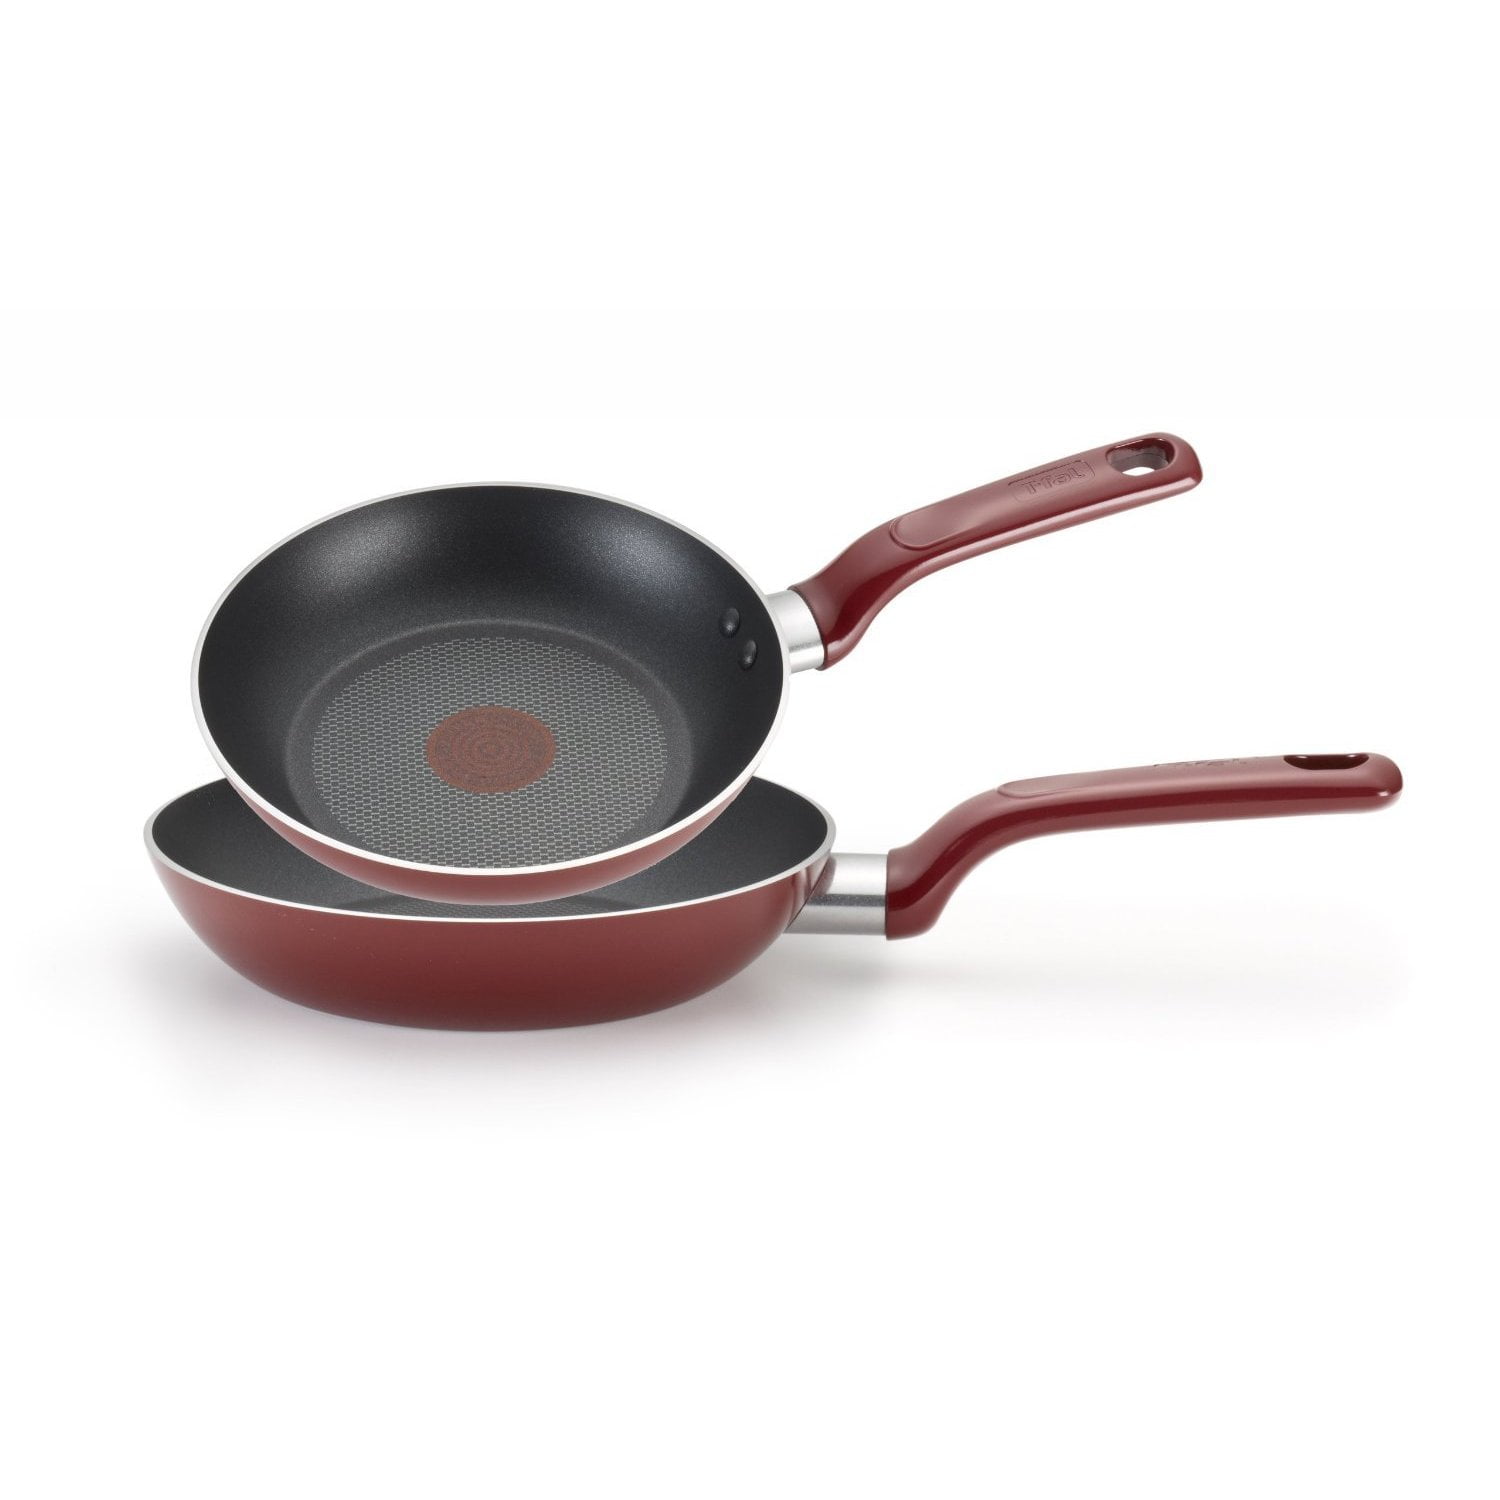 Excite 8 In. & 10.5 In. Red Non-Stick Fry Pan Set B039S264, 1